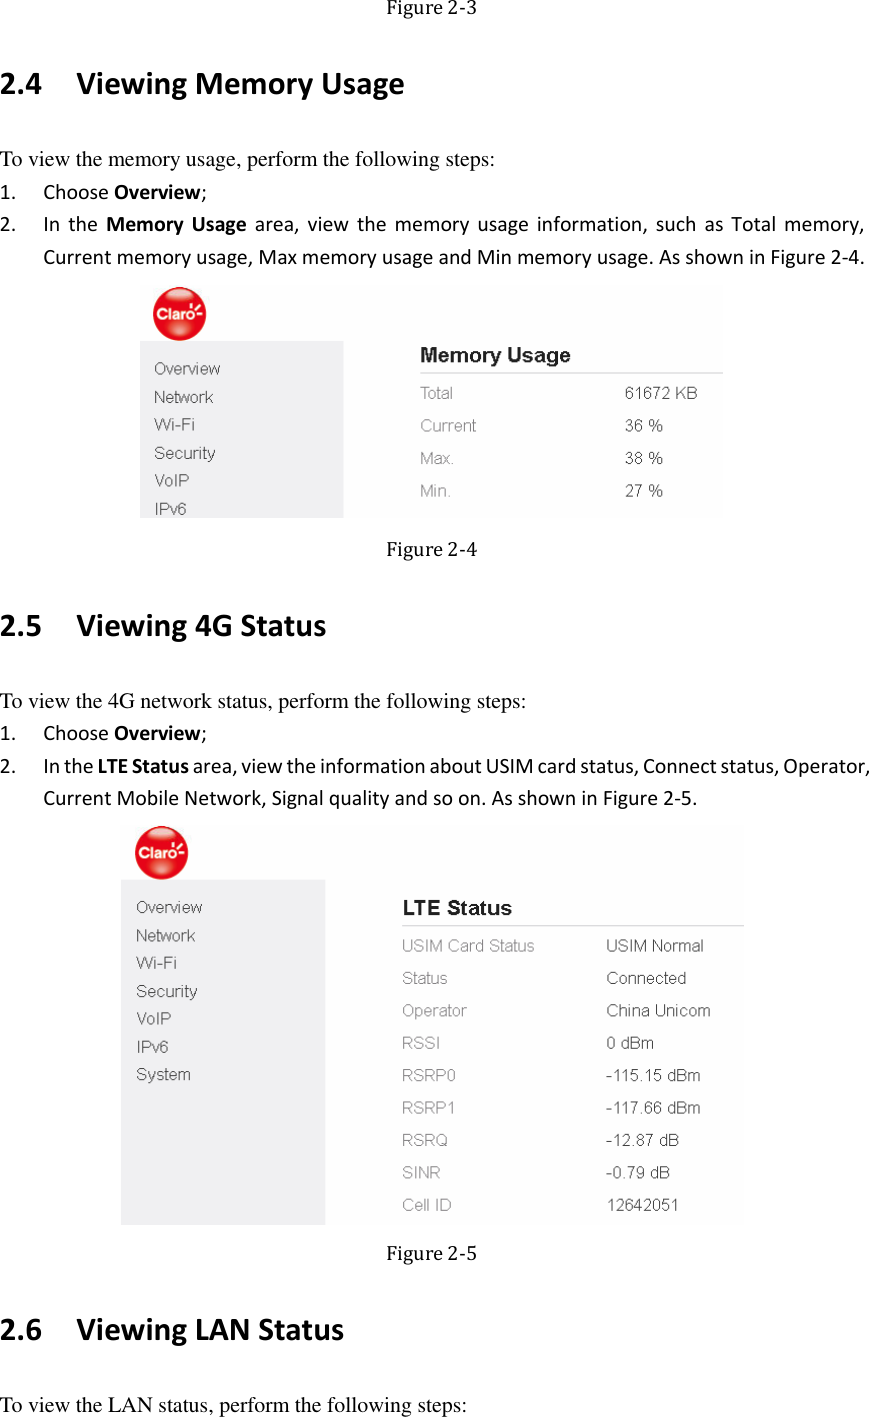   Figure 2-3 2.4   Viewing Memory Usage To view the memory usage, perform the following steps: 1. Choose Overview; 2. In the  Memory Usage  area,  view  the memory  usage information,  such  as Total memory, Current memory usage, Max memory usage and Min memory usage. As shown in Figure 2-4.  Figure 2-4 2.5   Viewing 4G Status To view the 4G network status, perform the following steps: 1. Choose Overview; 2. In the LTE Status area, view the information about USIM card status, Connect status, Operator, Current Mobile Network, Signal quality and so on. As shown in Figure 2-5.  Figure 2-5 2.6   Viewing LAN Status To view the LAN status, perform the following steps: 